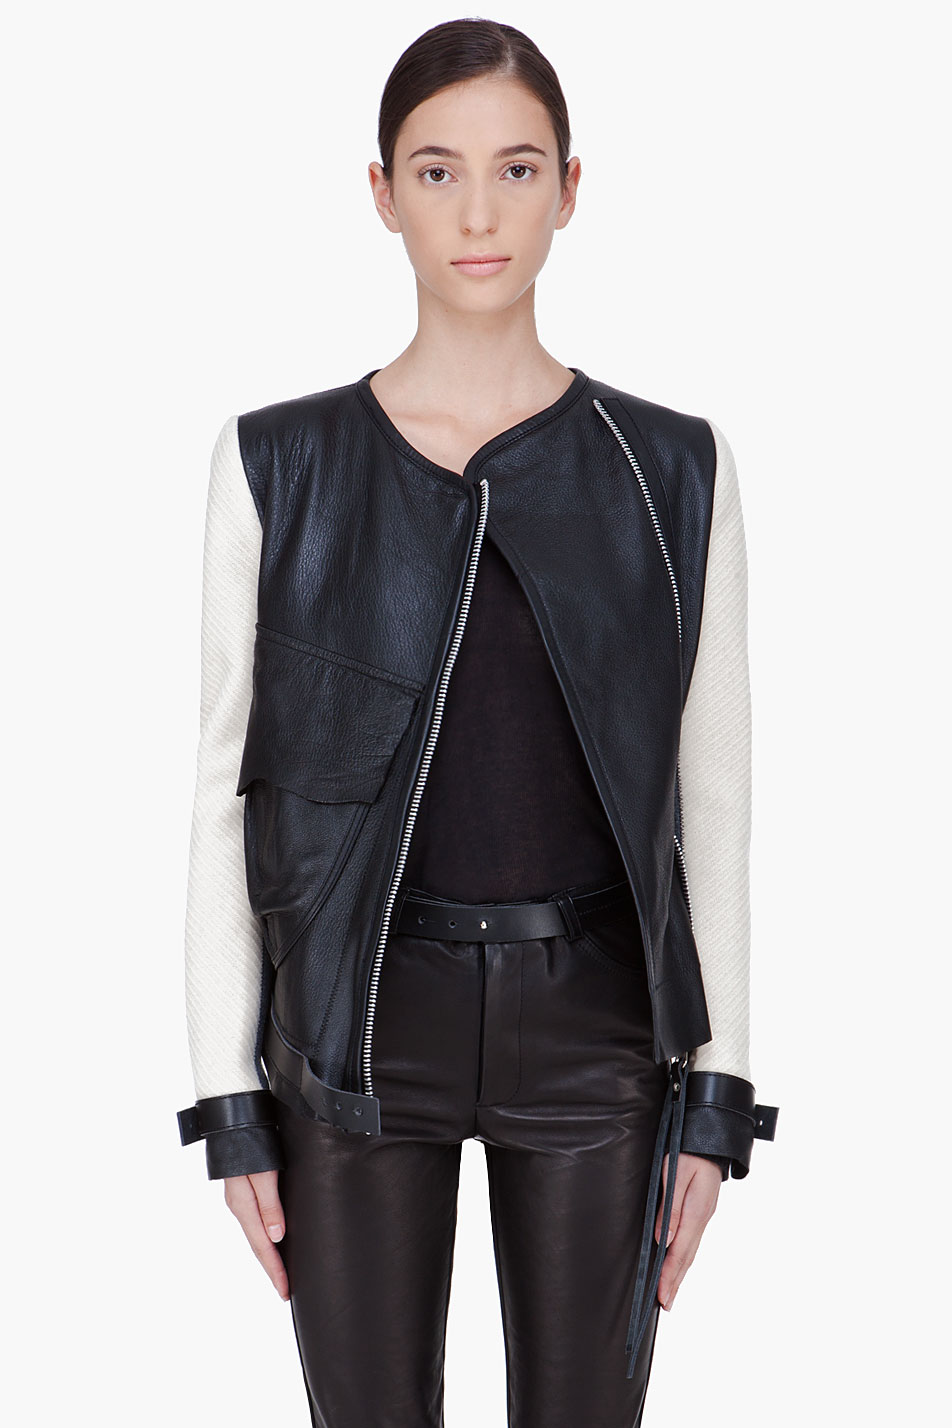 Lyst - Denis gagnon Wool Sleeve Leather Bomber Jacket in Black